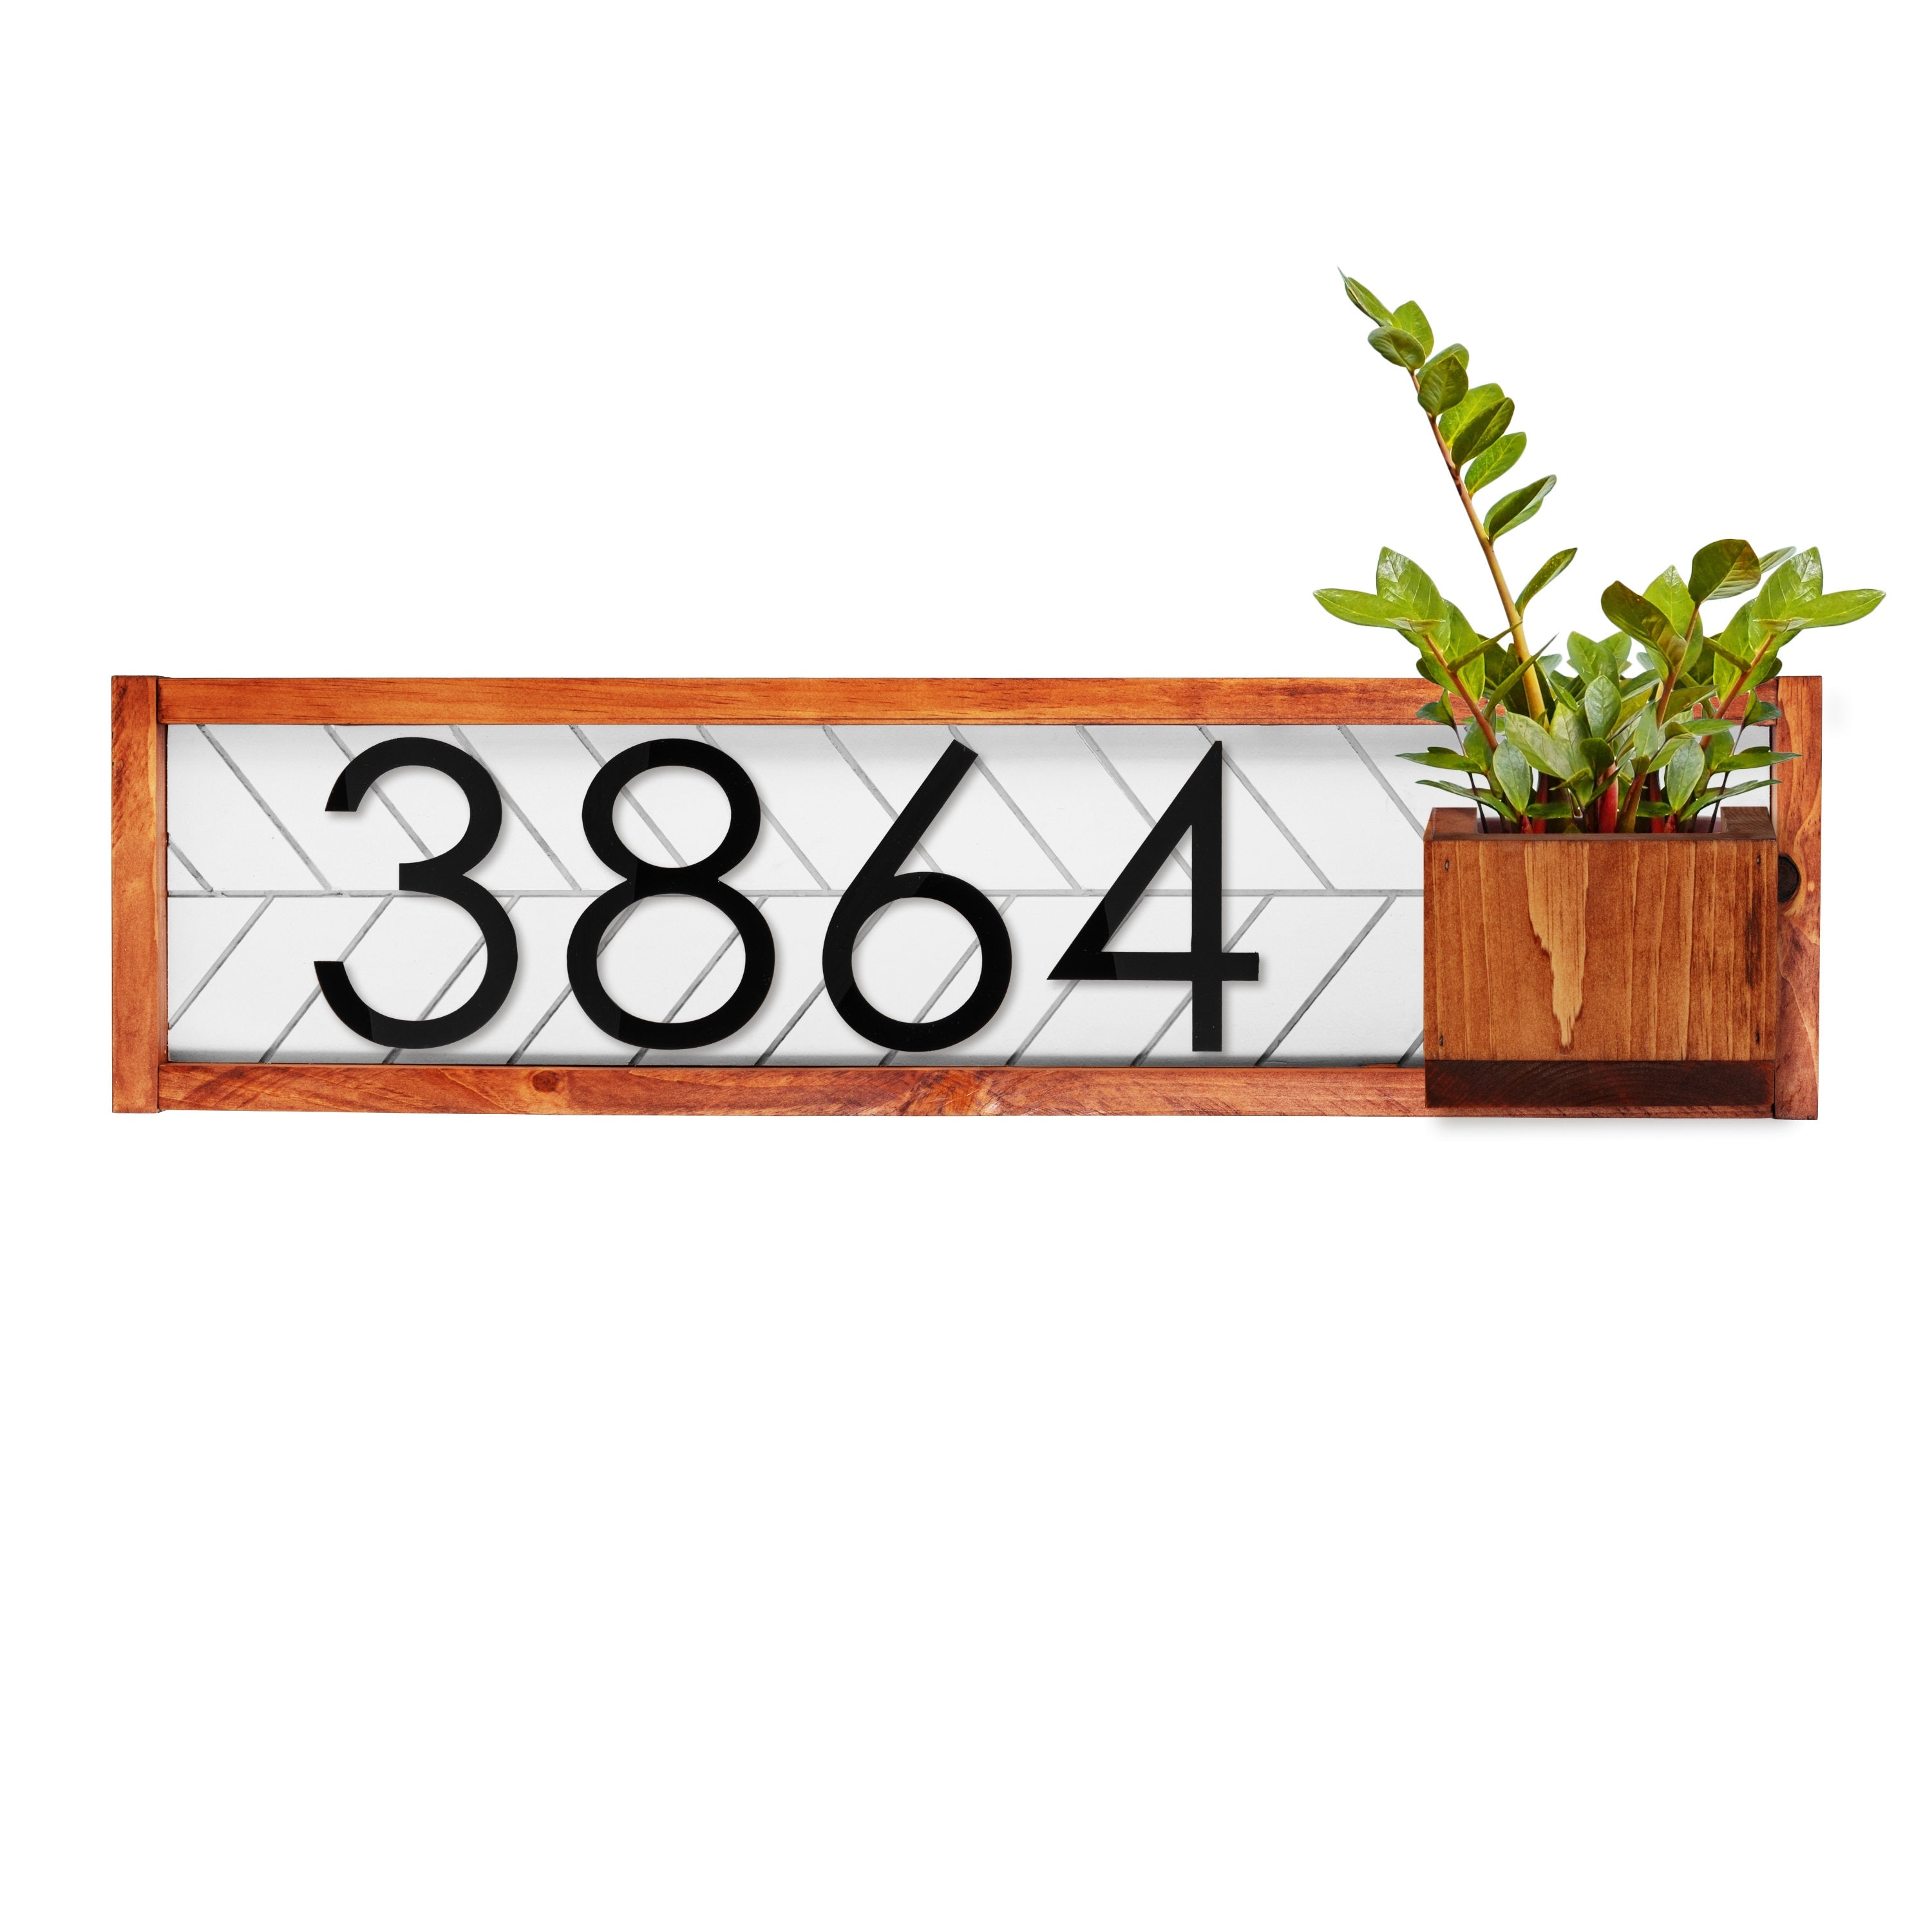 Penfeild Hoizontal Address Sign with Planter, Personalized Address Plaque  House Numbers Contemporary Address Numbers Housewarming Gift